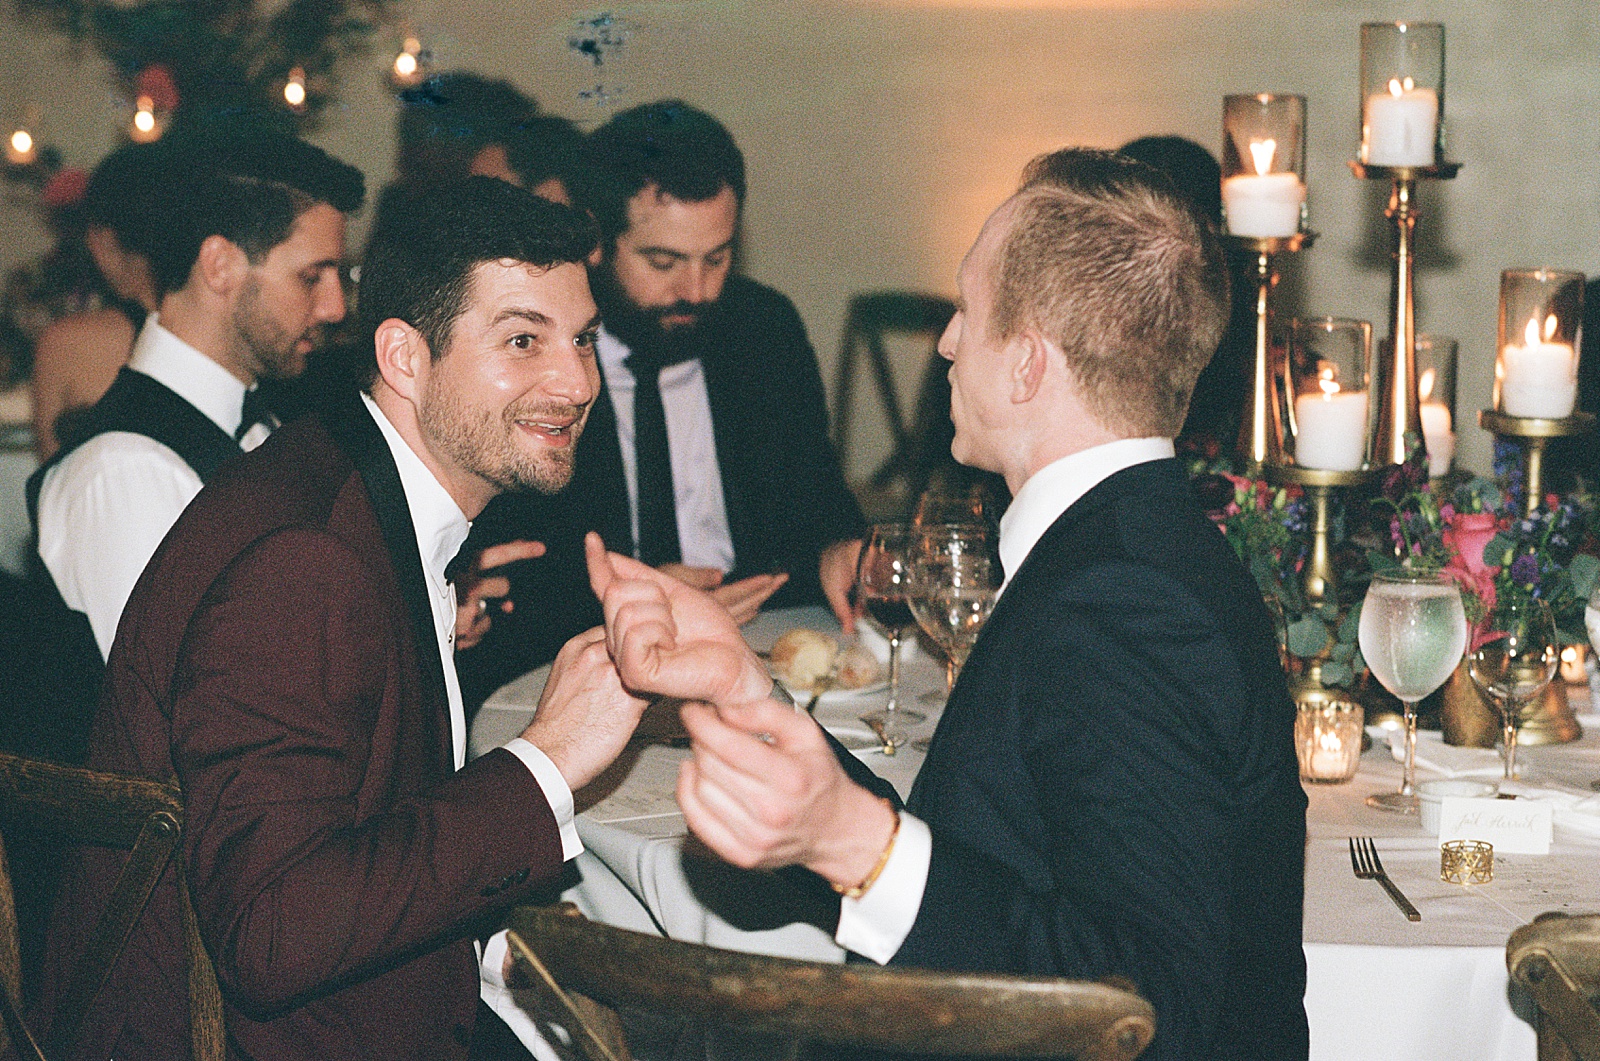 Wedding guests sit at reception tables and talk in a candid wedding photo on film.